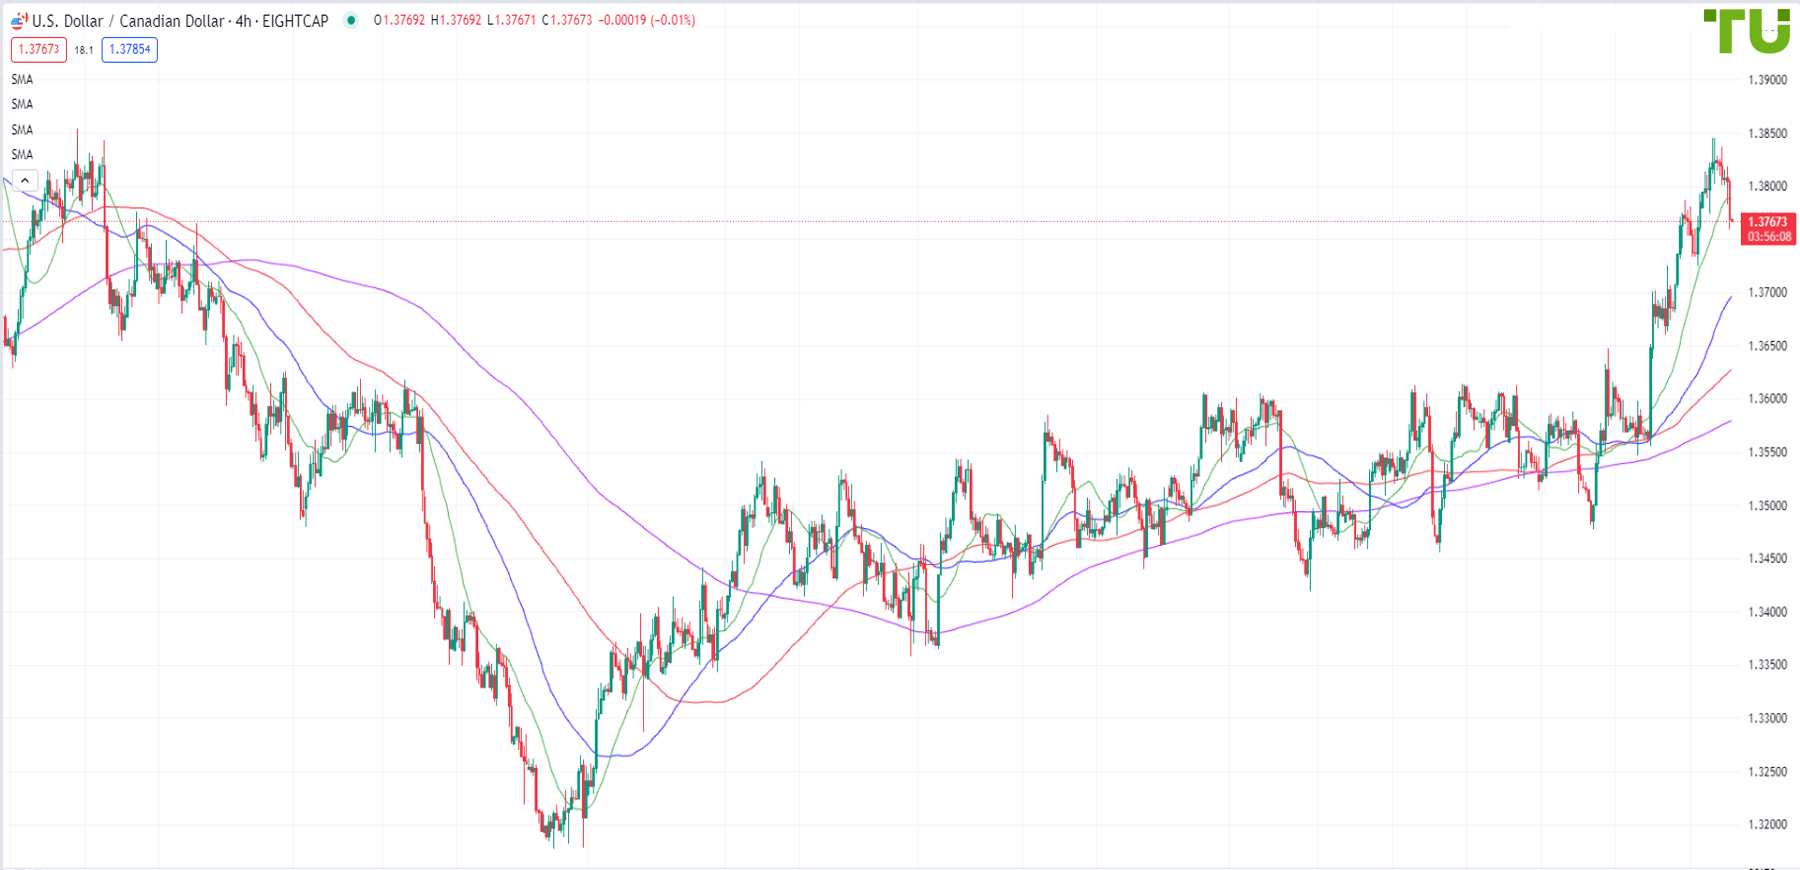 US dollar/Canadian dollar sold near strong resistance